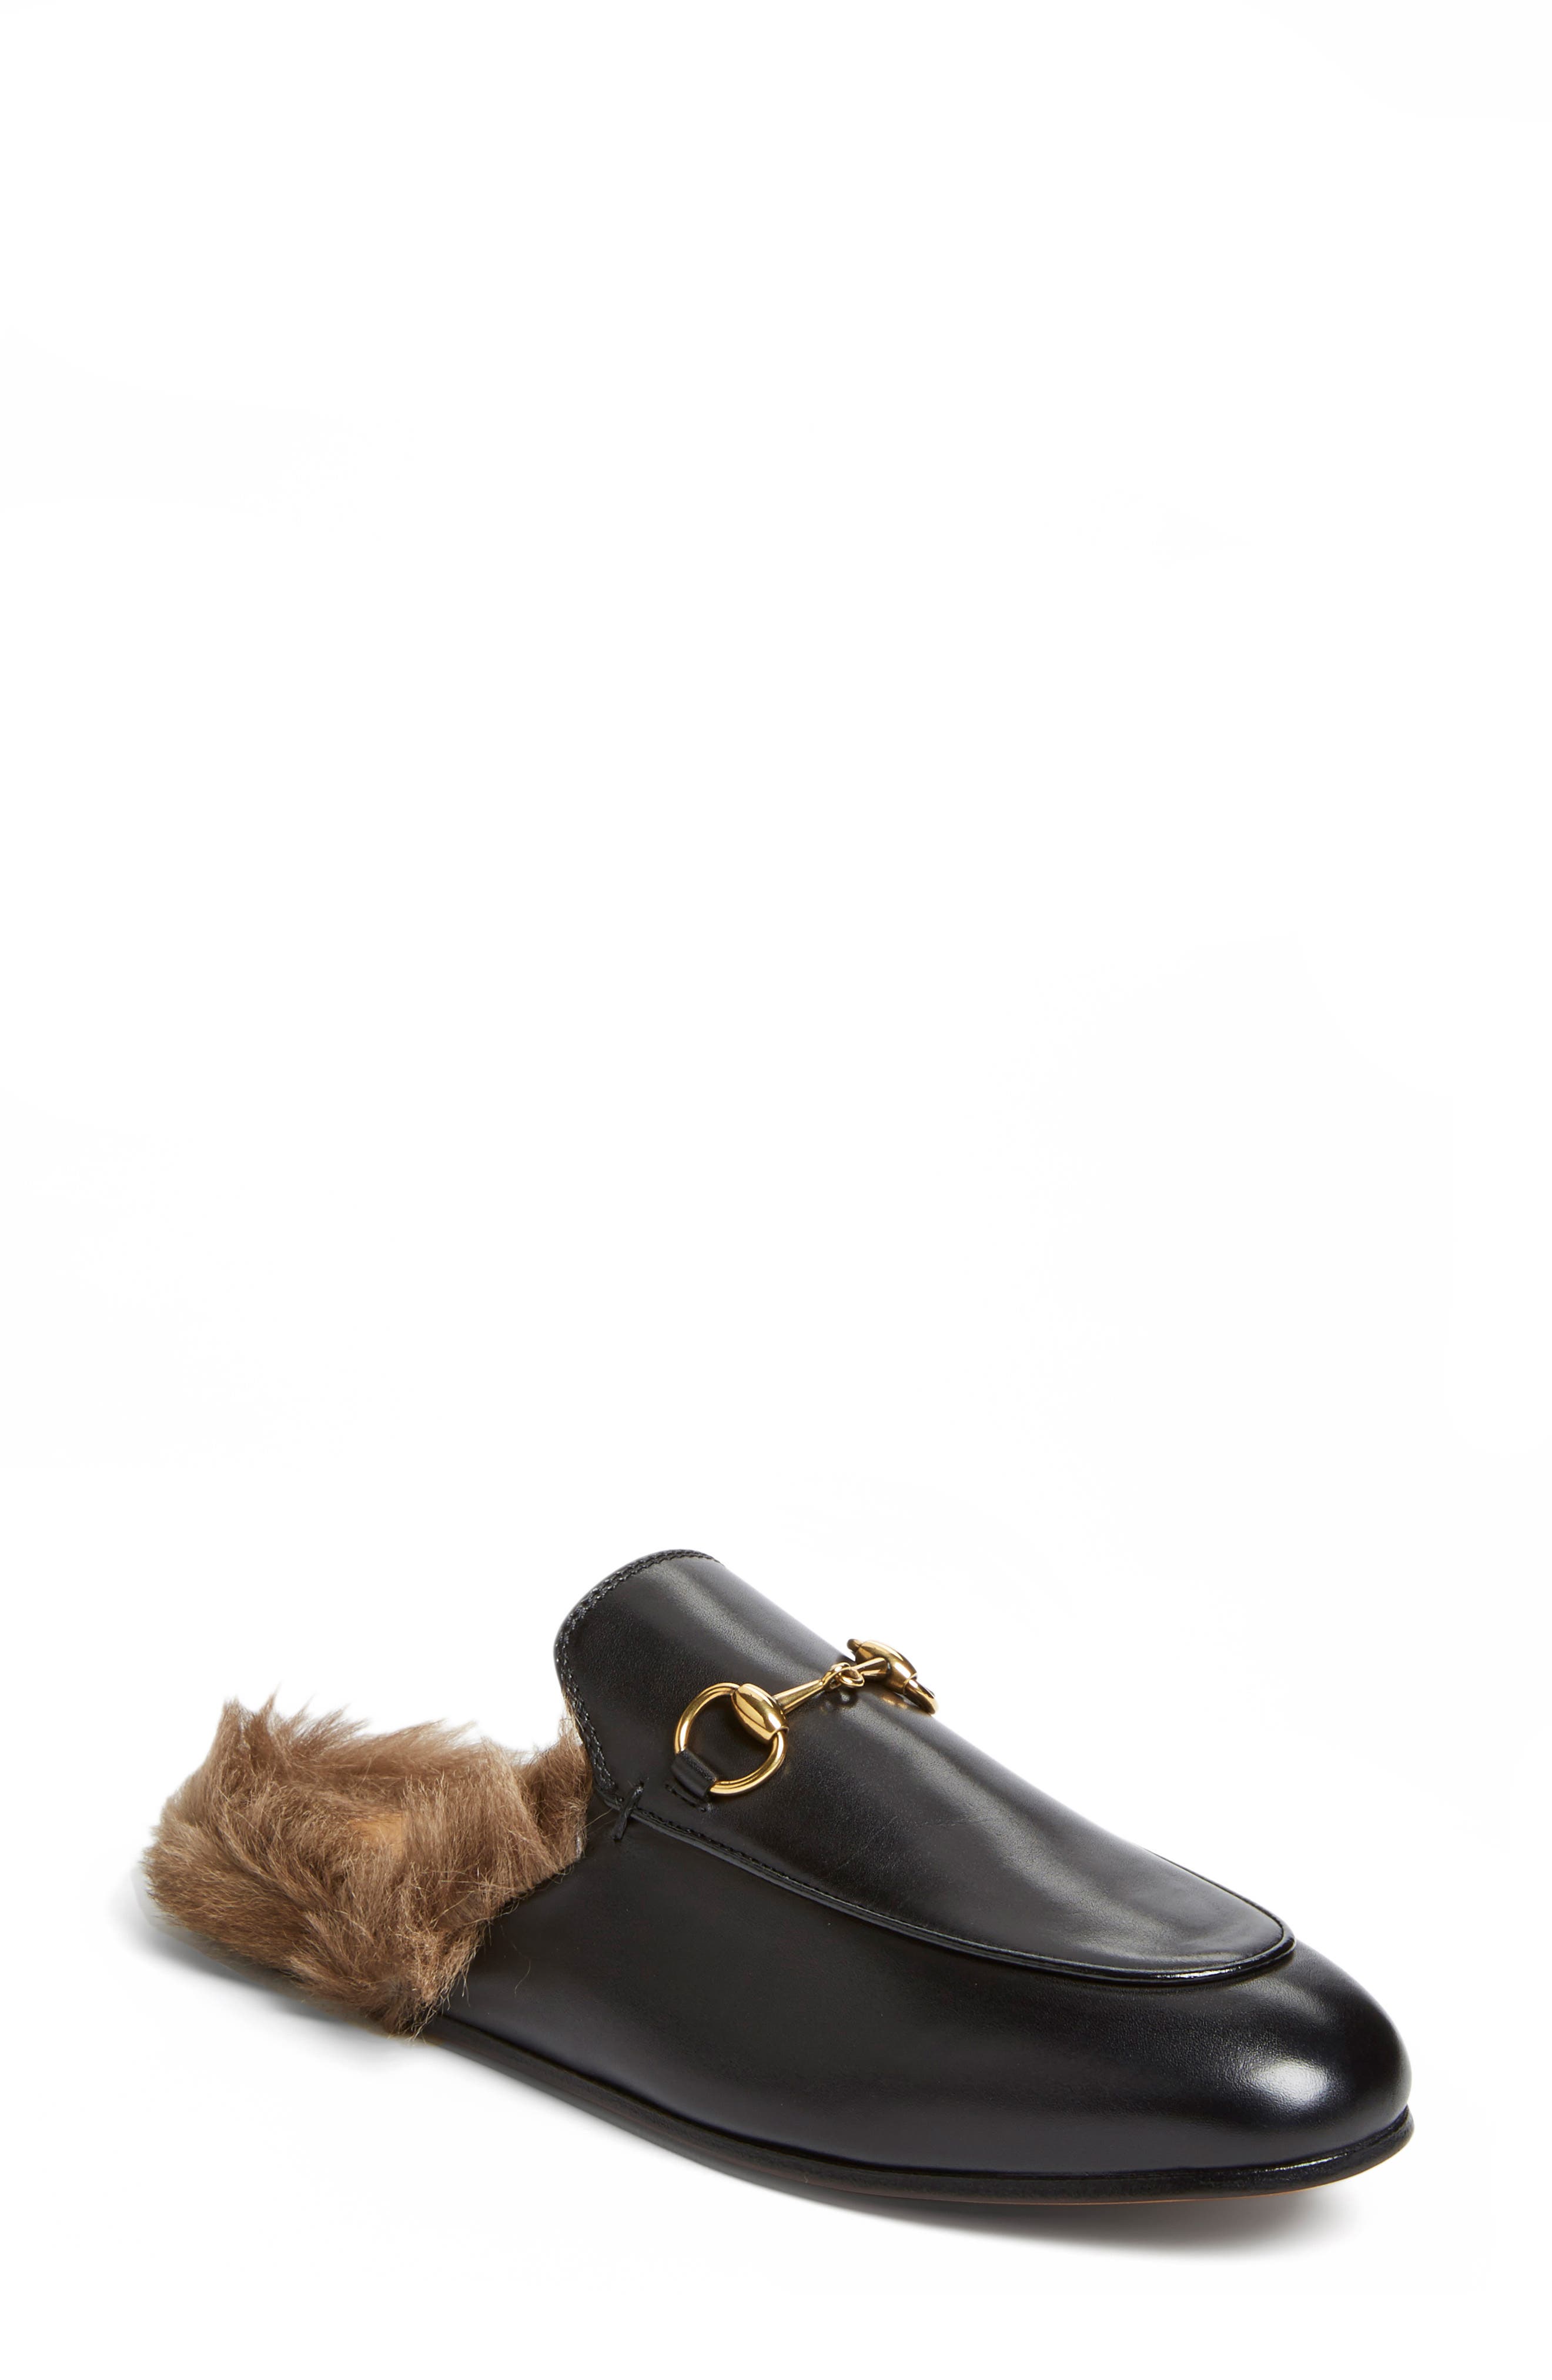 gucci princetown loafers women